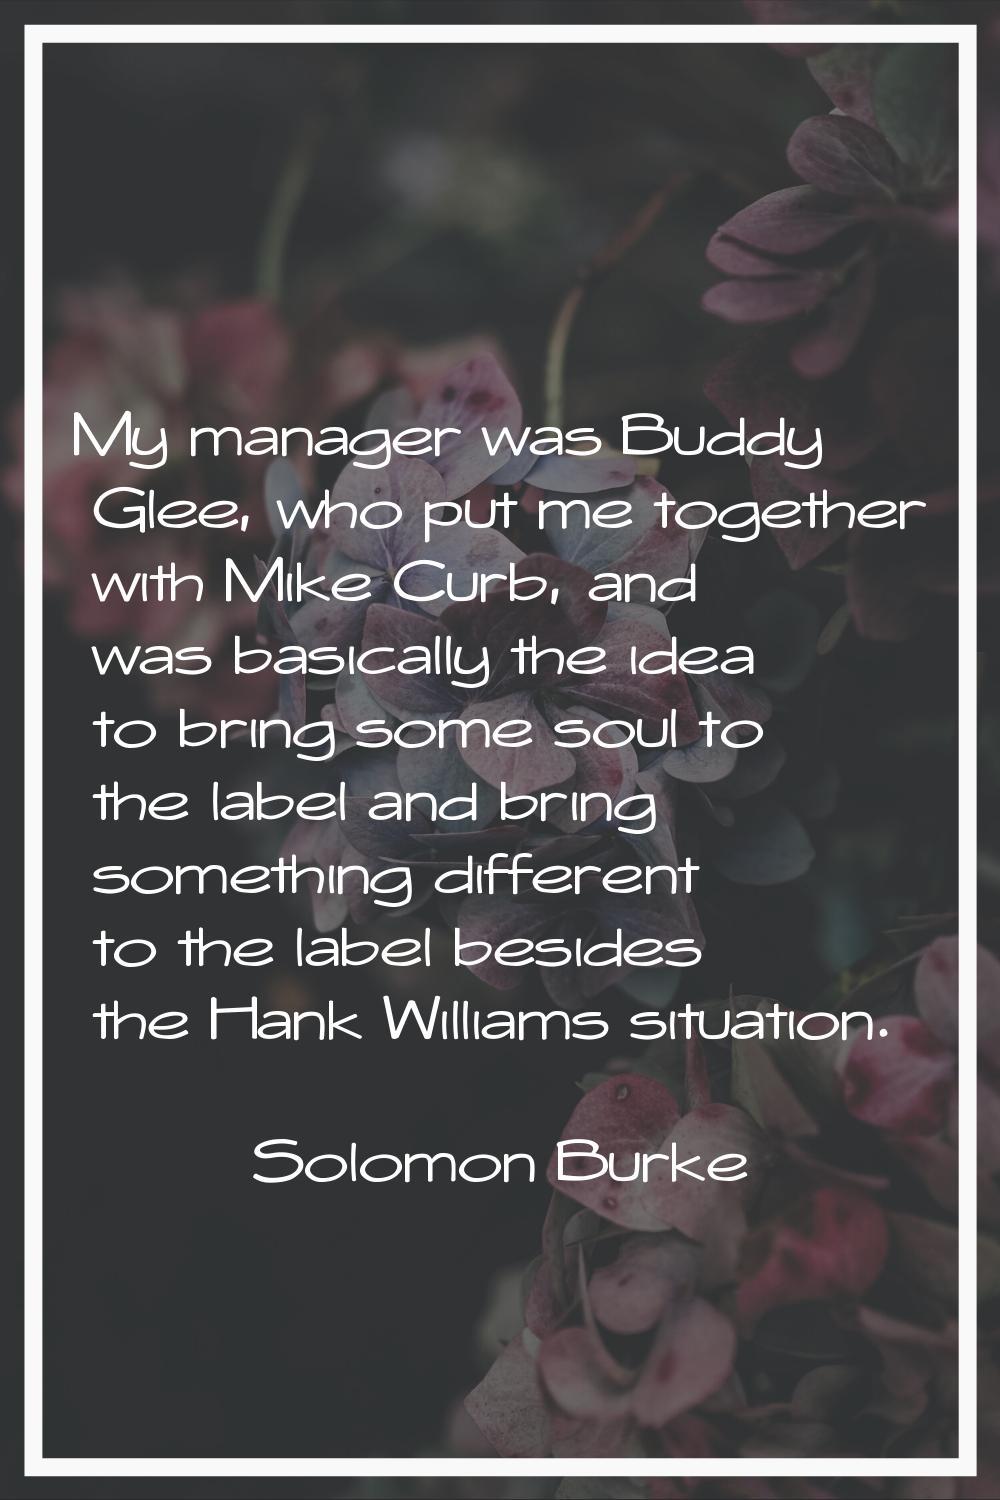 My manager was Buddy Glee, who put me together with Mike Curb, and was basically the idea to bring 